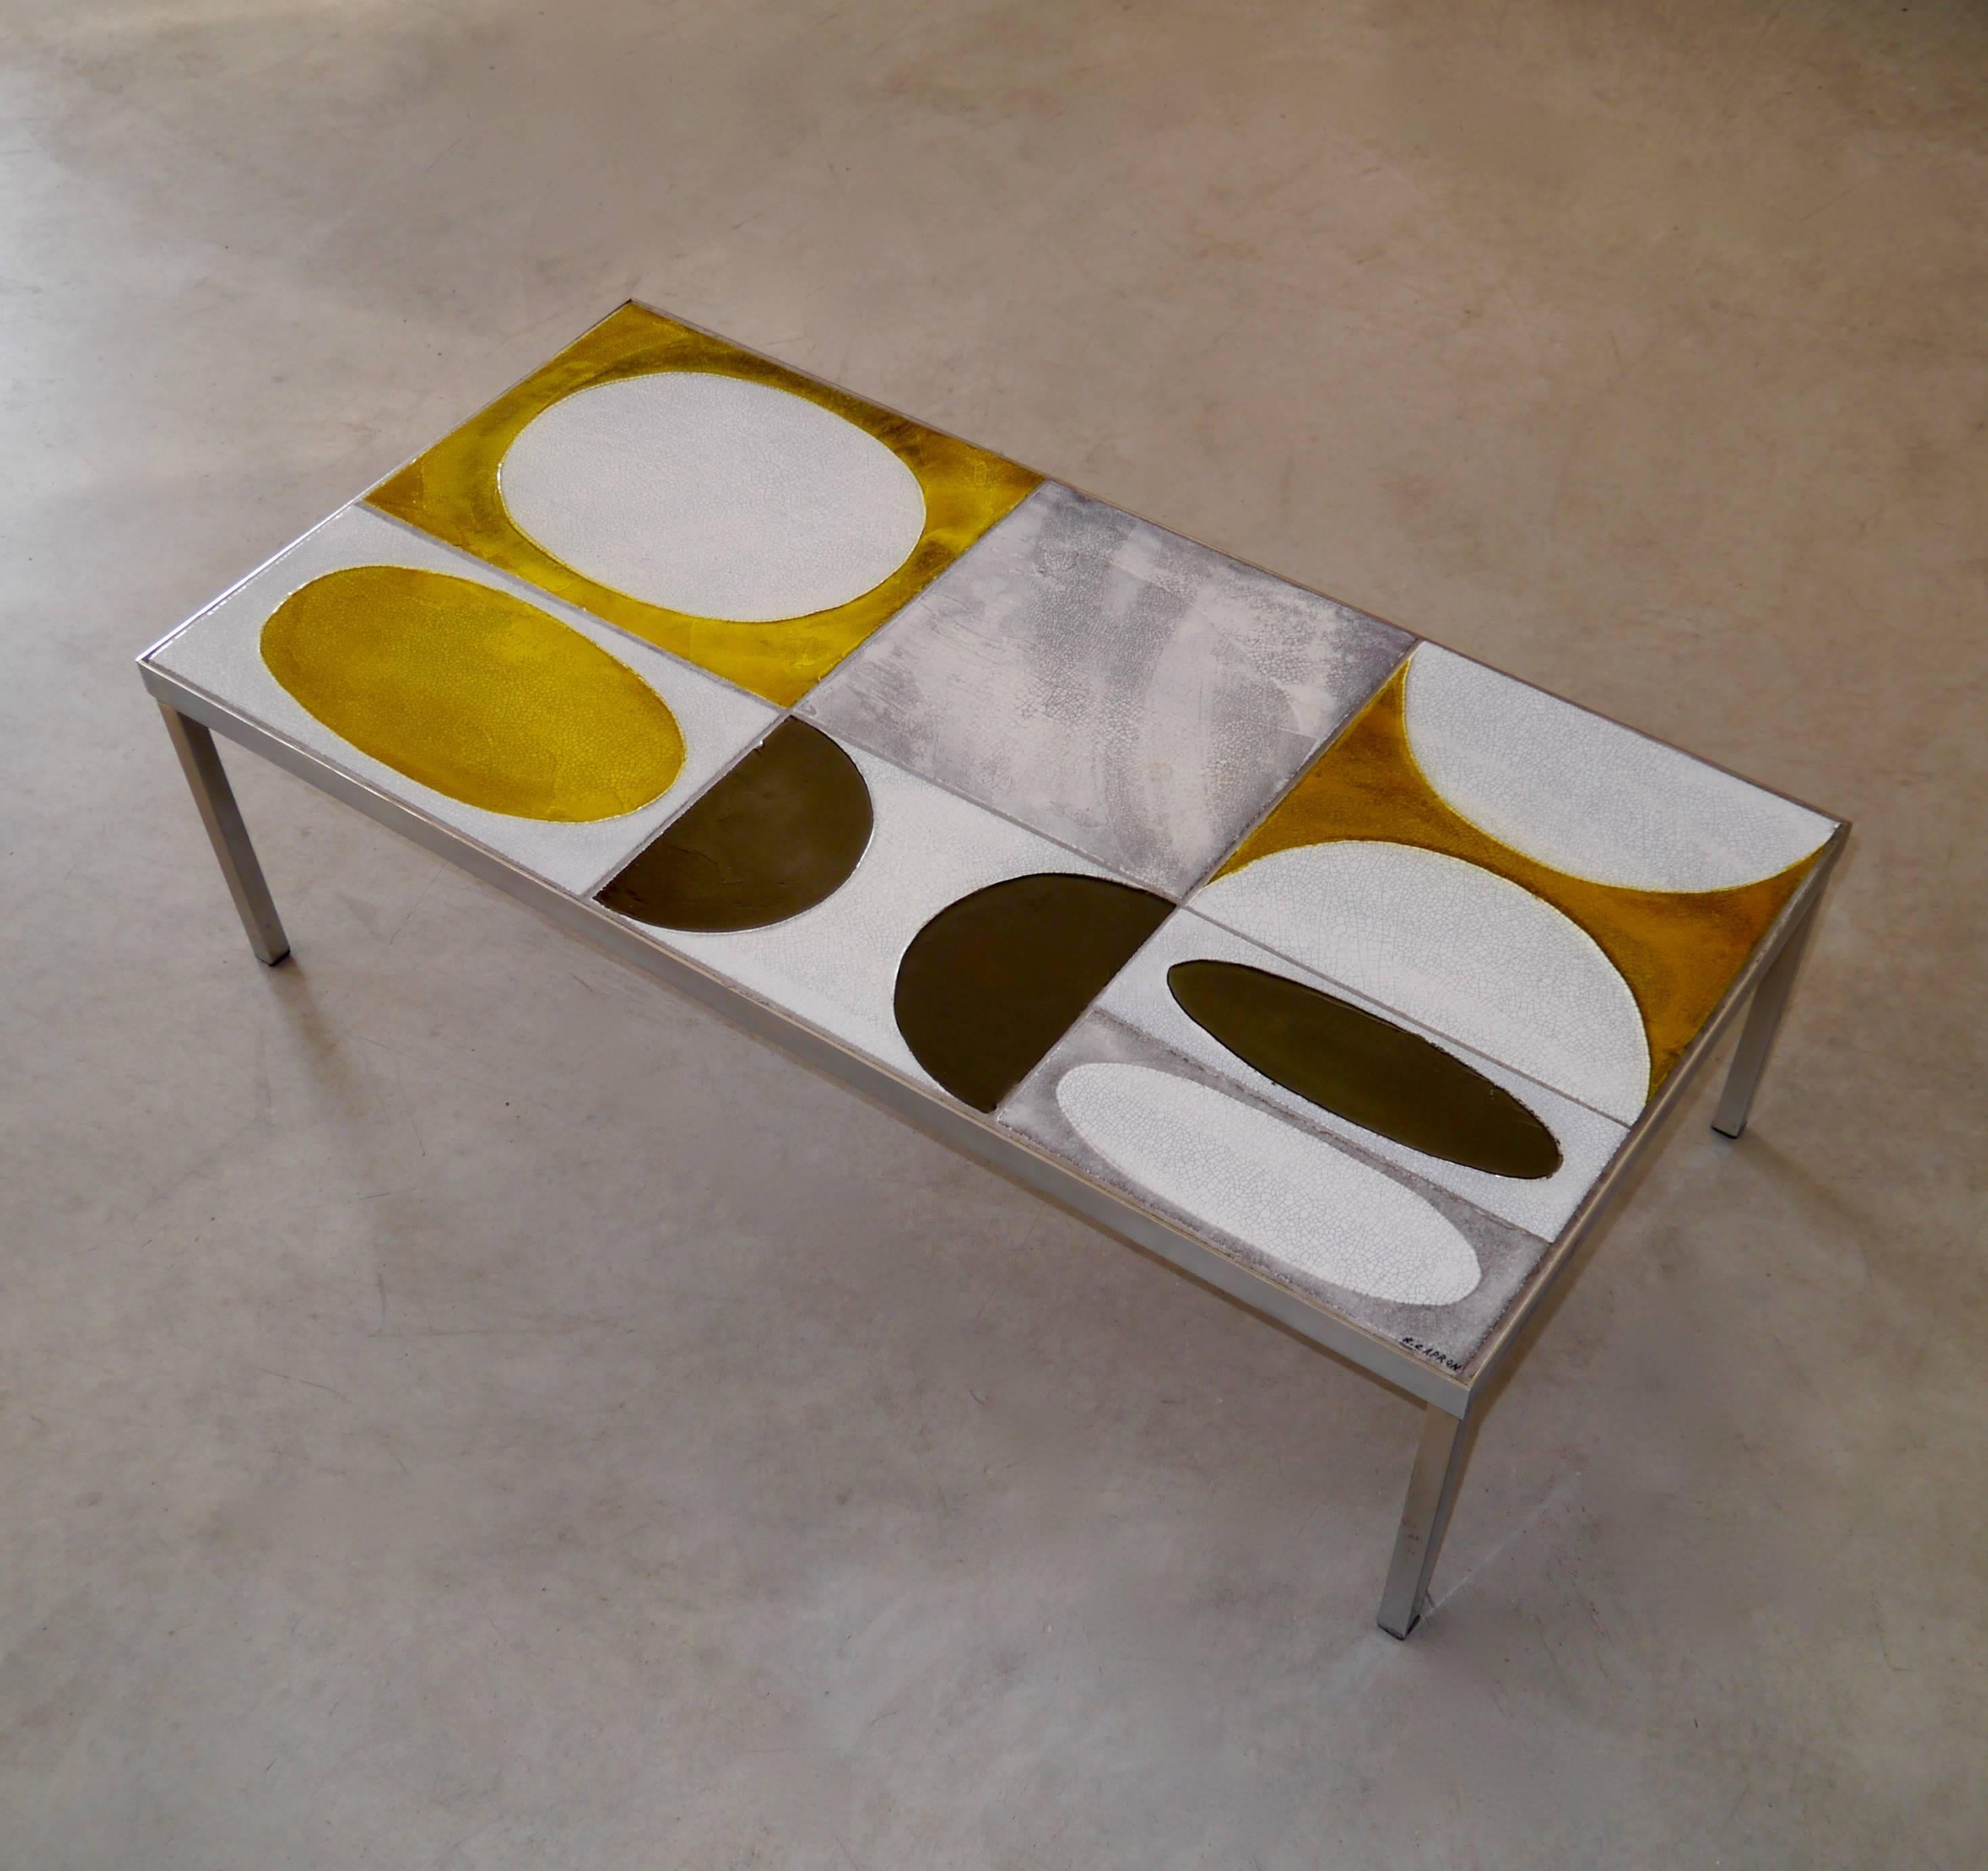 Glazed lava table top with geometric and textured patterns.

Metal frame and feet.

The table is signed by the French artist.

With the exception of a light default at one angle, this table comes in its original and exceptional